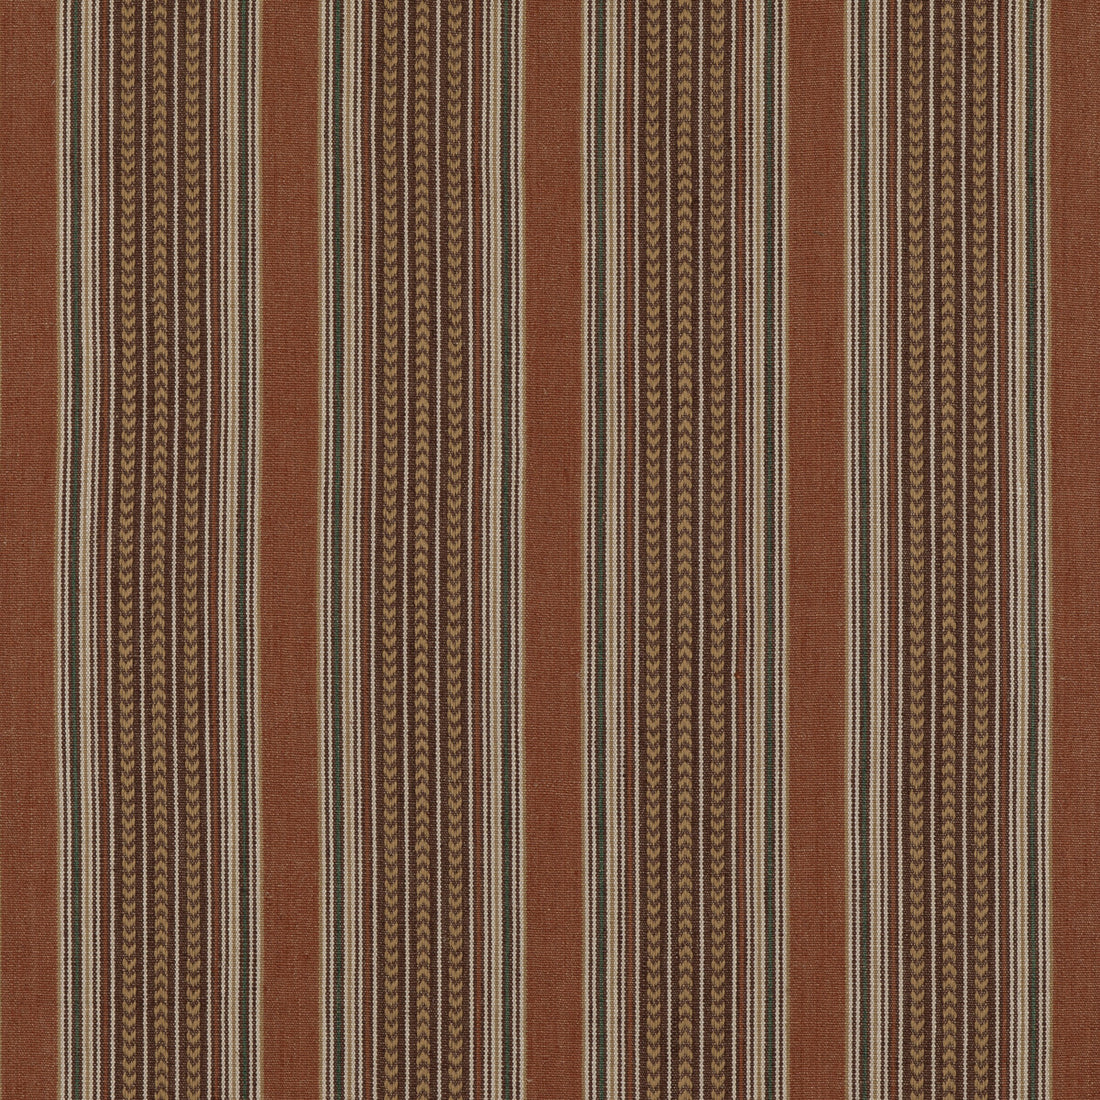 Berber Stripe fabric in spice color - pattern FD792.T30.0 - by Mulberry in the Mulberry Stripes II collection